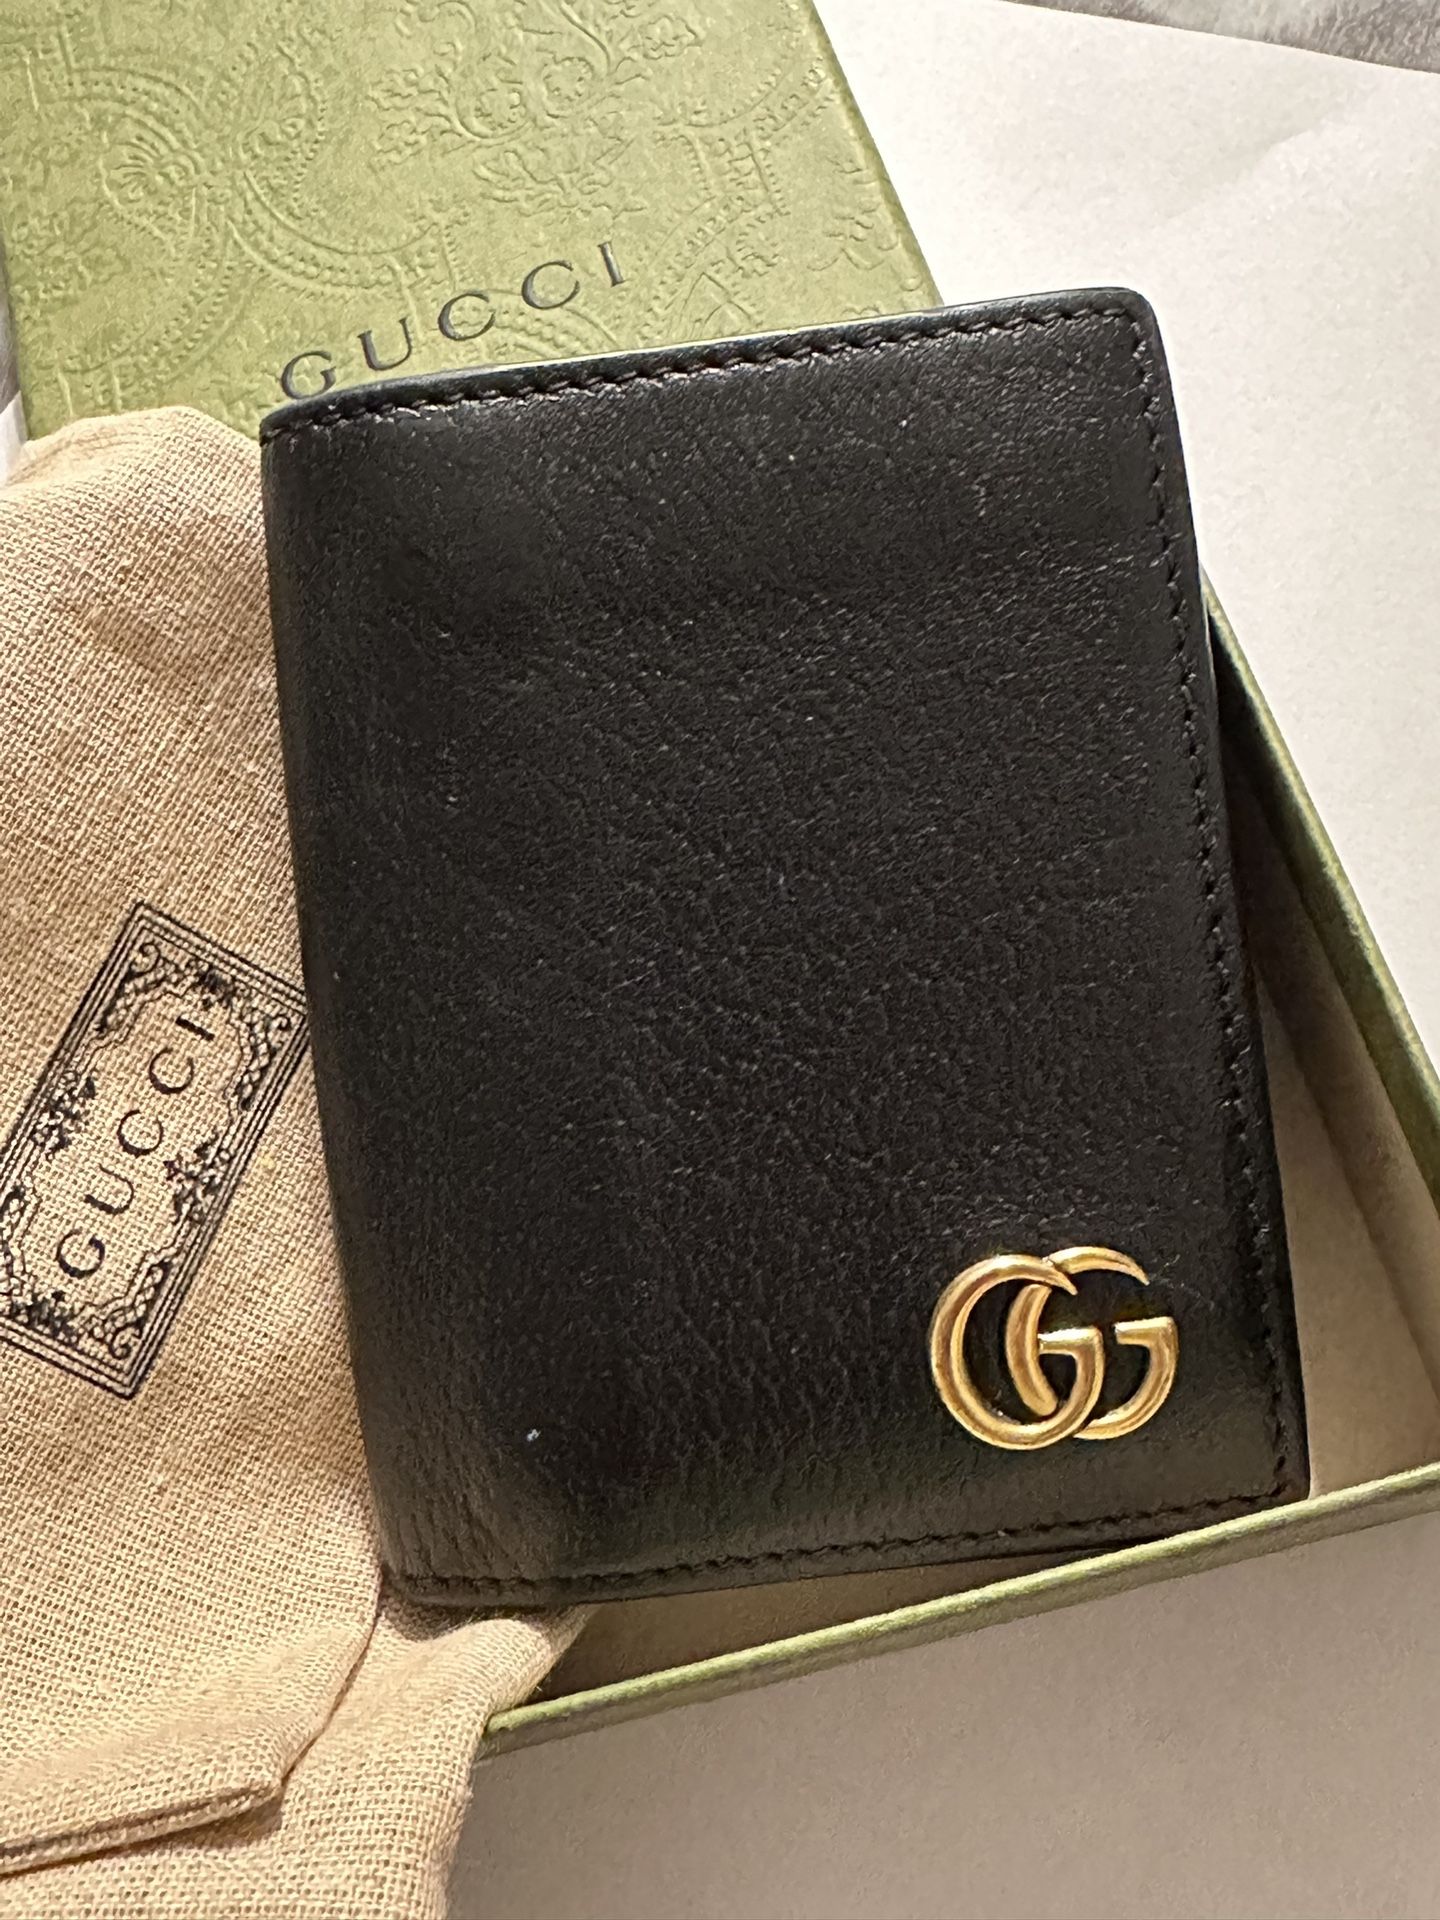 Used-Gucci Mens Wallet 